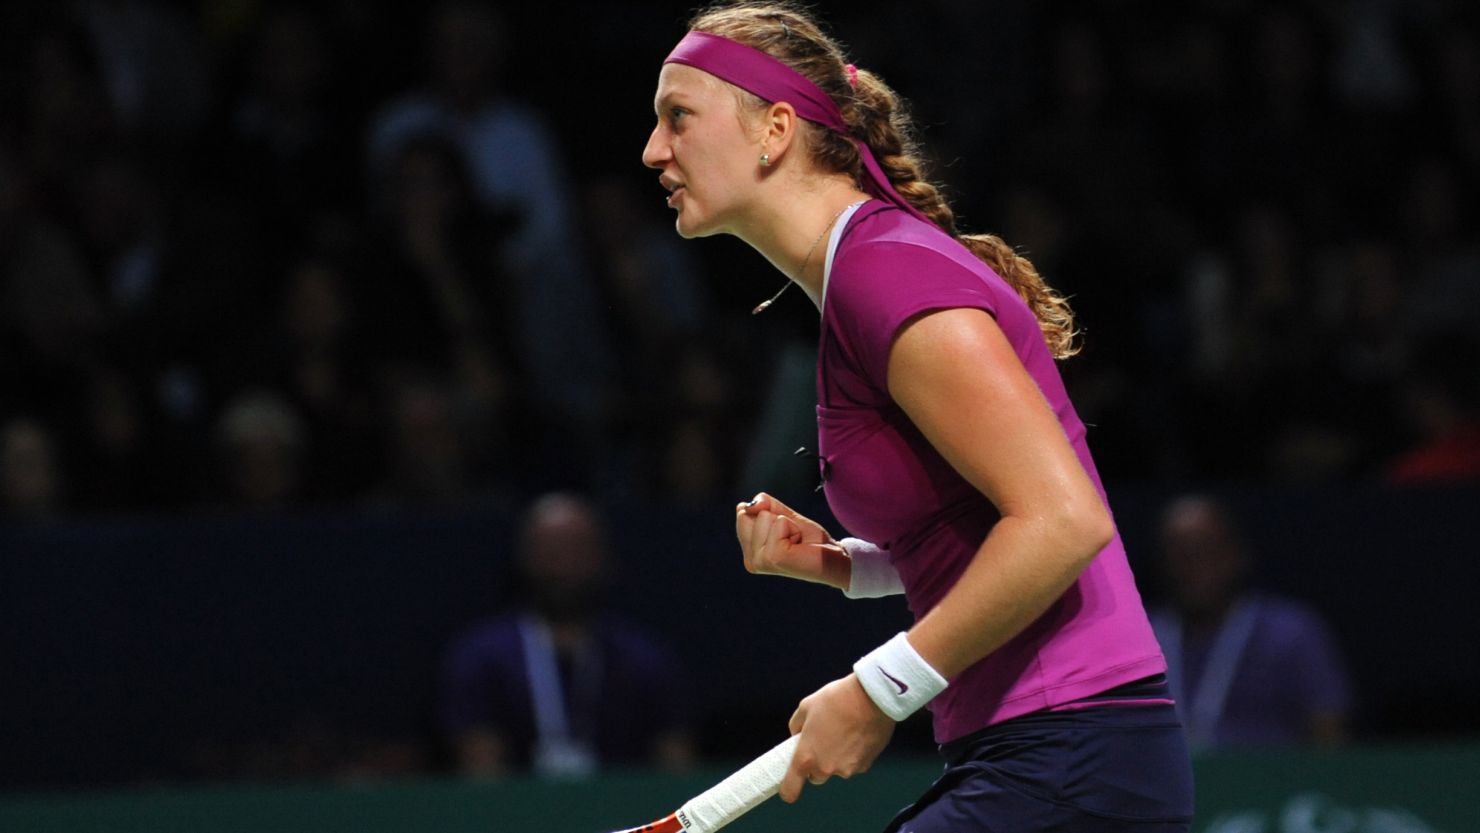 Petra Kvitova celebrates a point on her way to victory in the season-ending WTA Tour Championship in Istanbul.